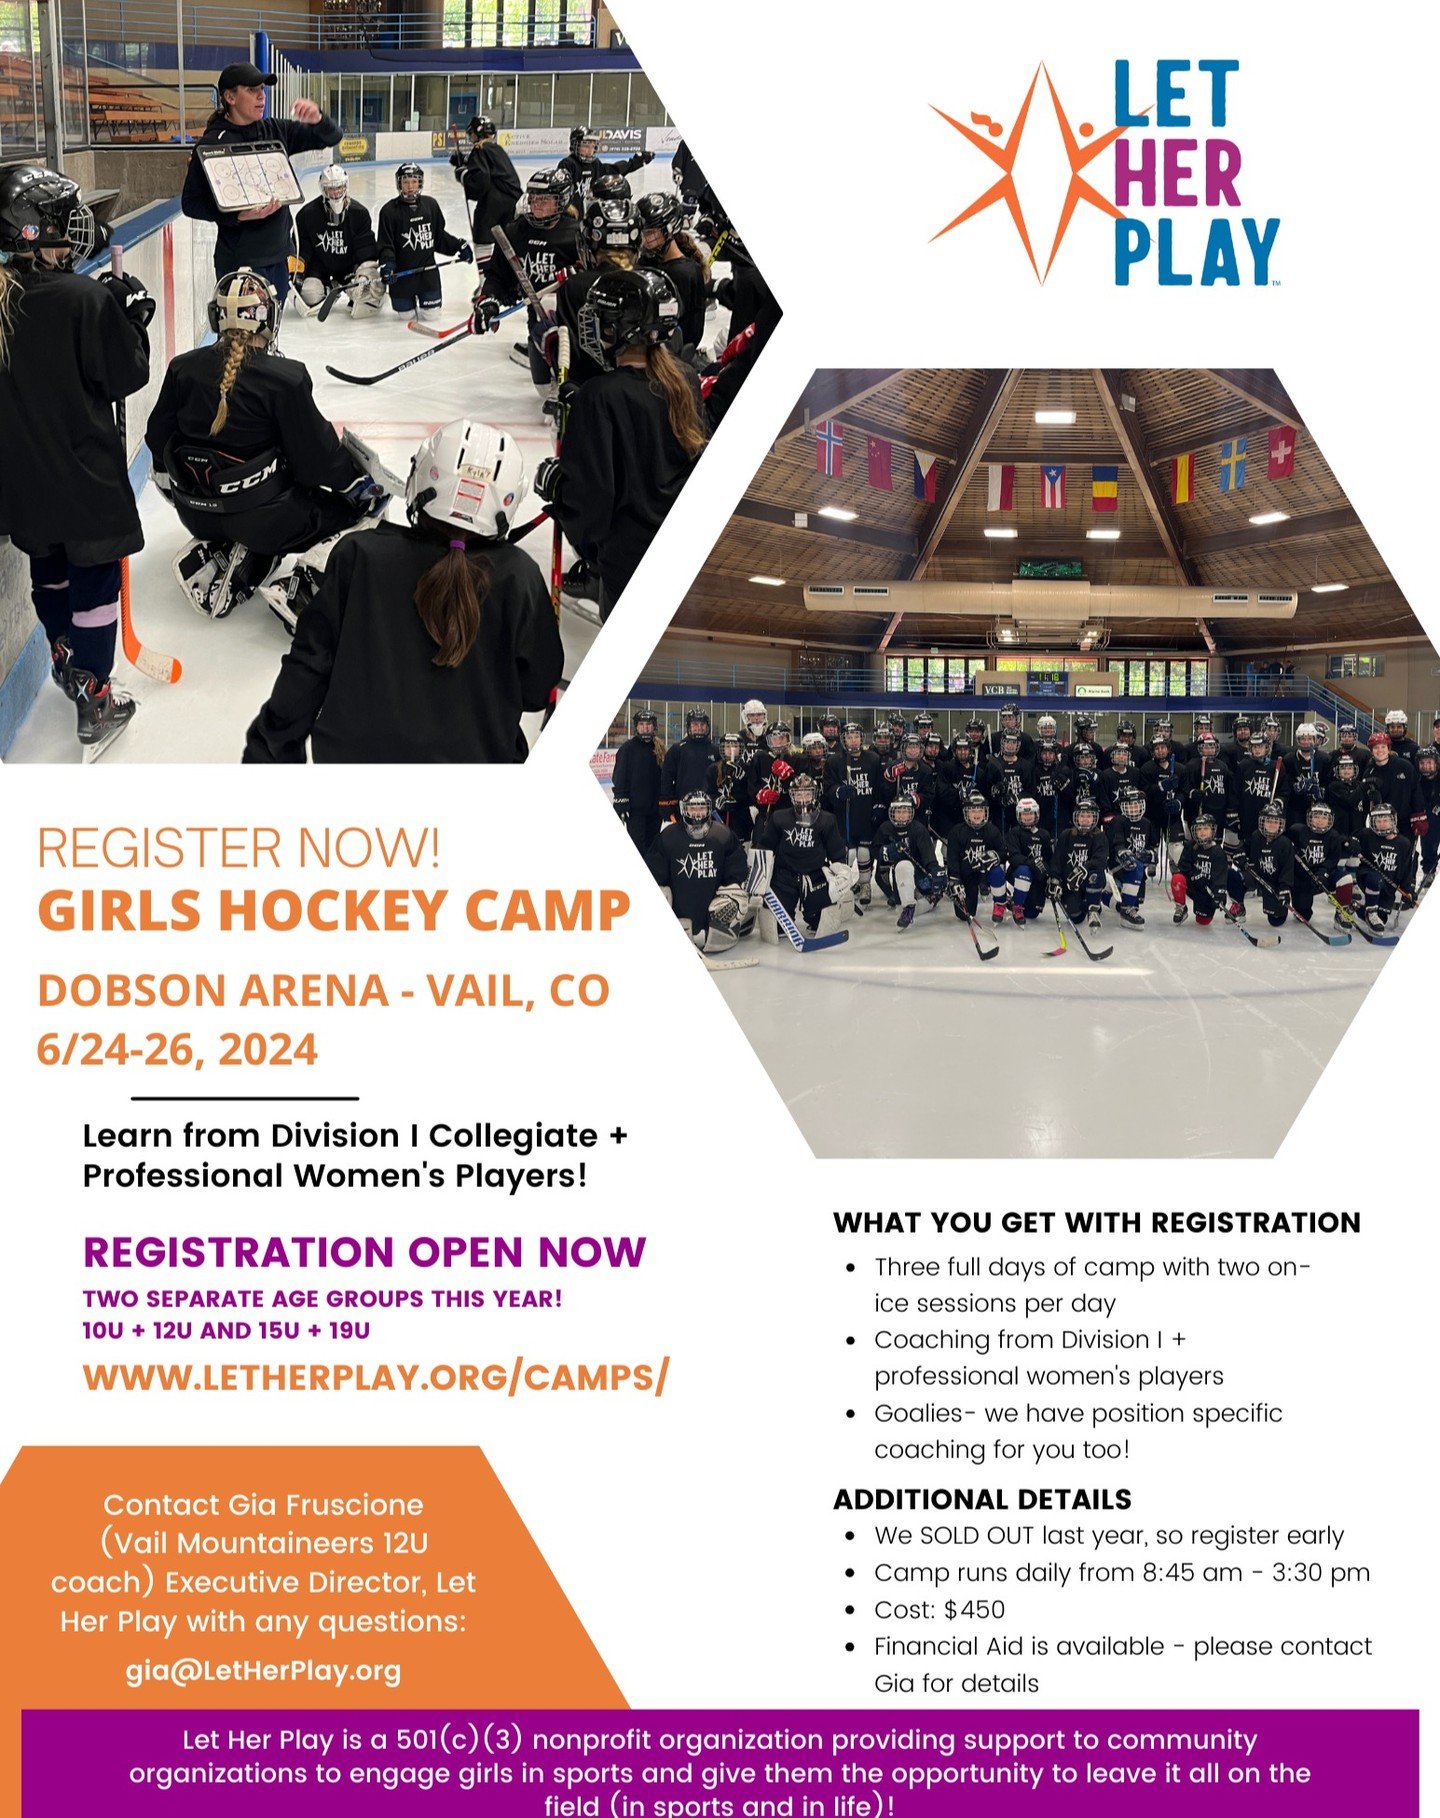 There are still a few spots available in our girls hockey camp in Colorado June 24-26. Our coaches are women's collegiate players and coaches (one is an olympian too). Visit our website under &quot;camps&quot; for more details. 

#girlshockey #girlsi